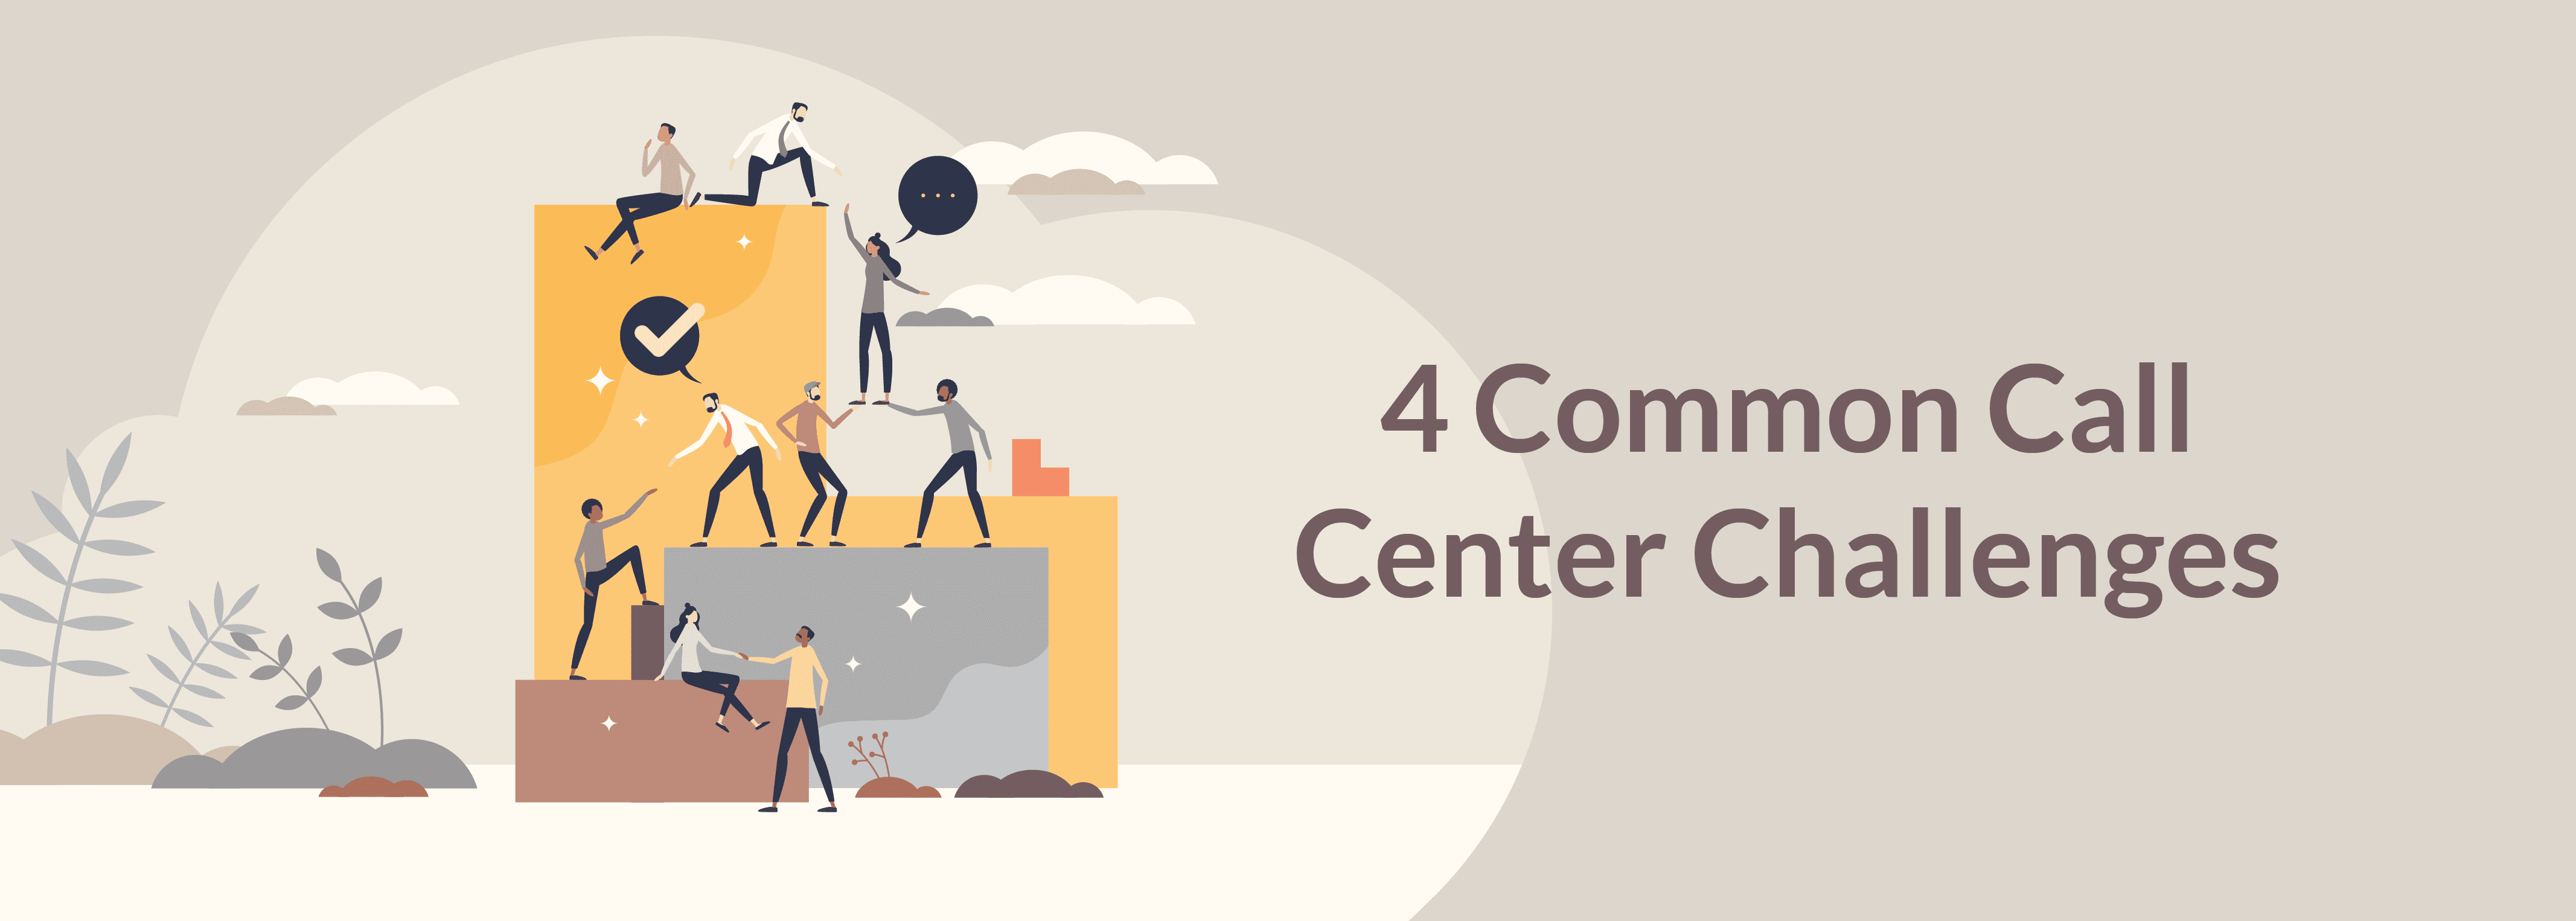 4 Common Call Center Challenges